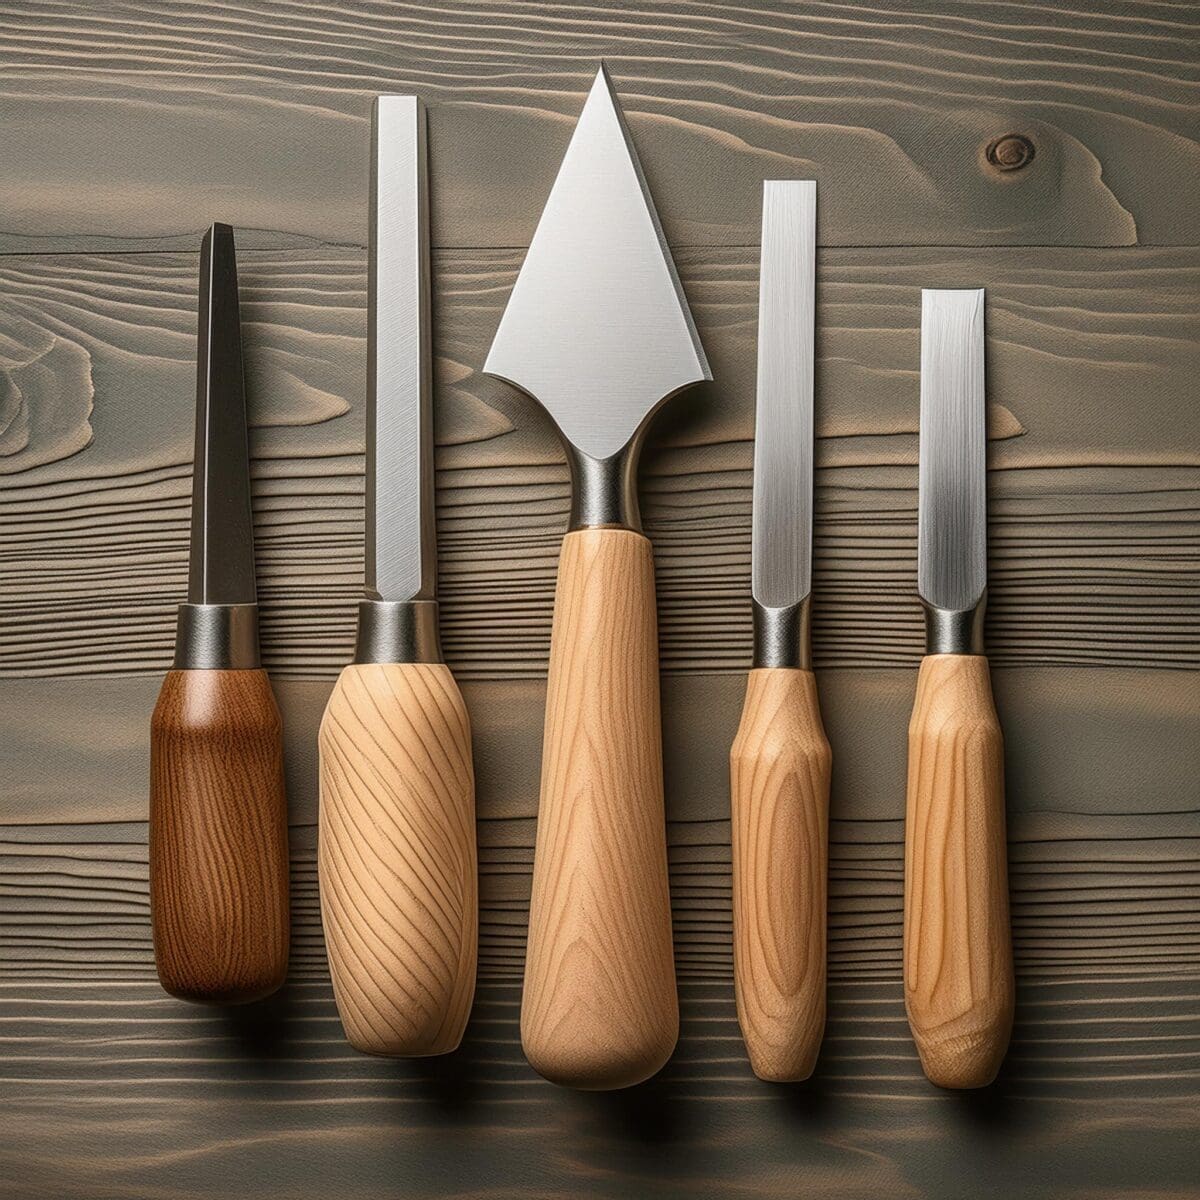 An image of 5 tools intended to illustrate the concept of building a brand with the right tools